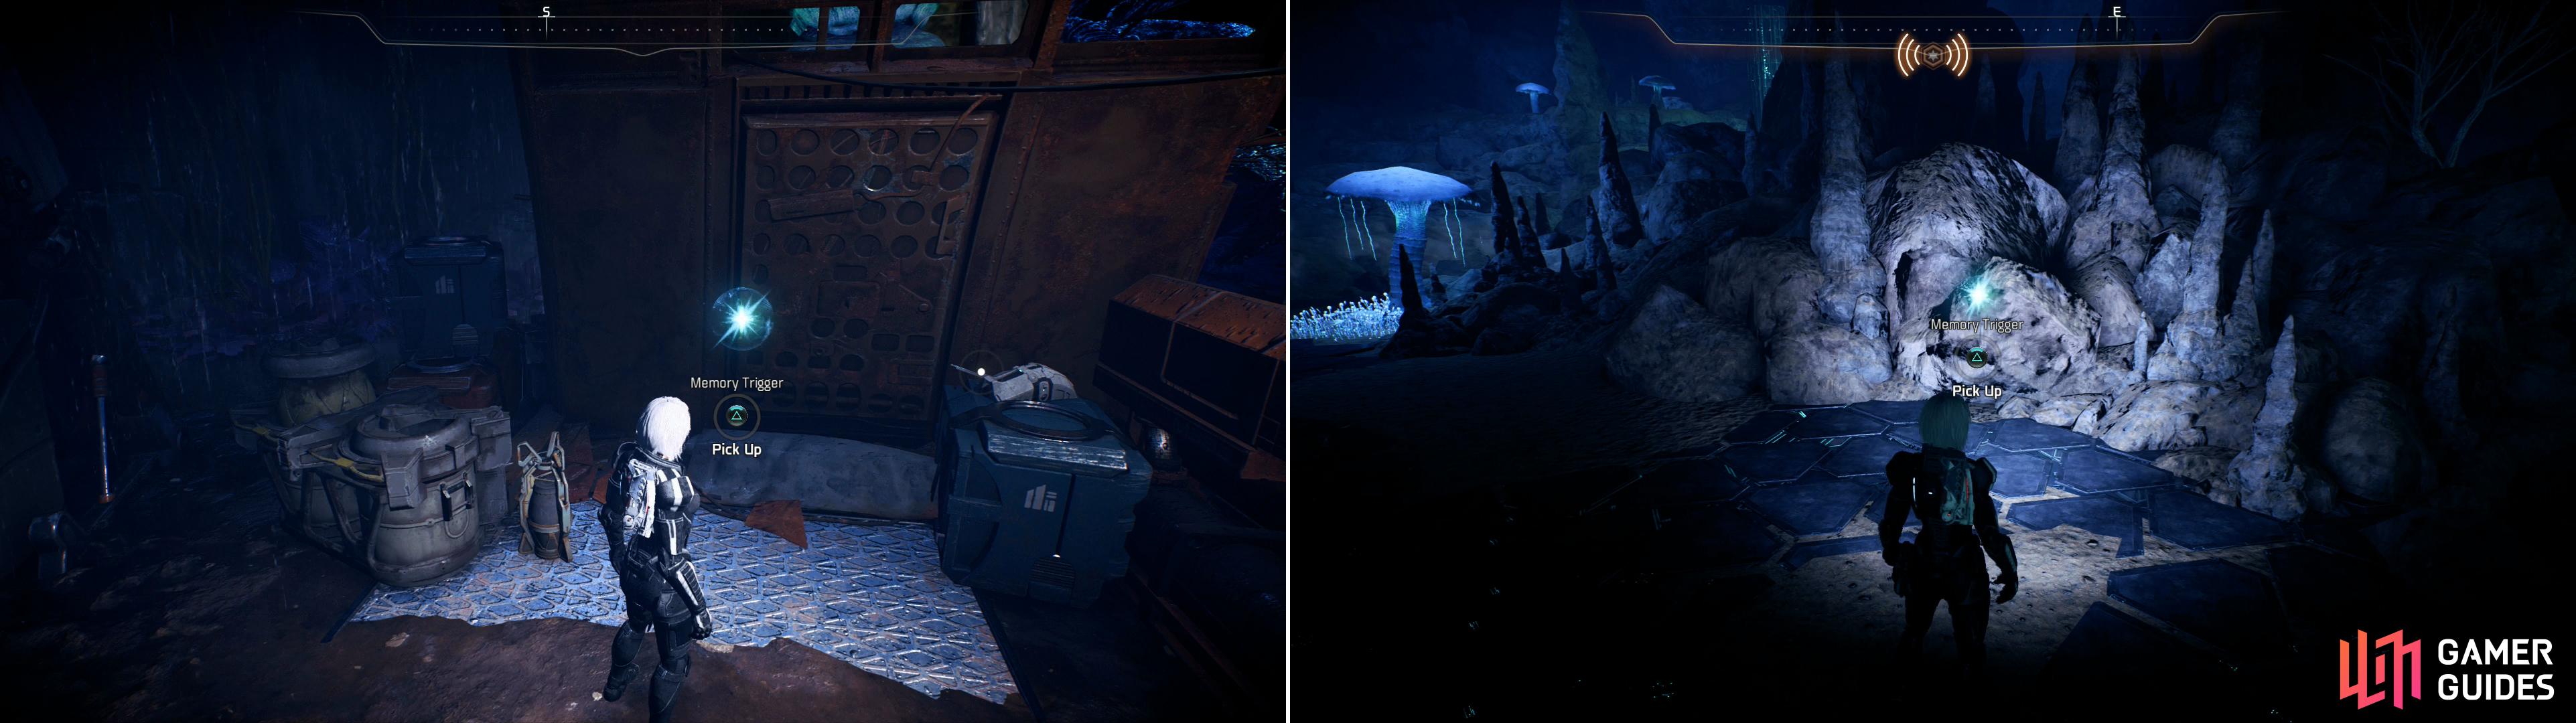 You can find a Memory Trigger in the Turian camp (left) and in the caves Taavos leads you to (right).